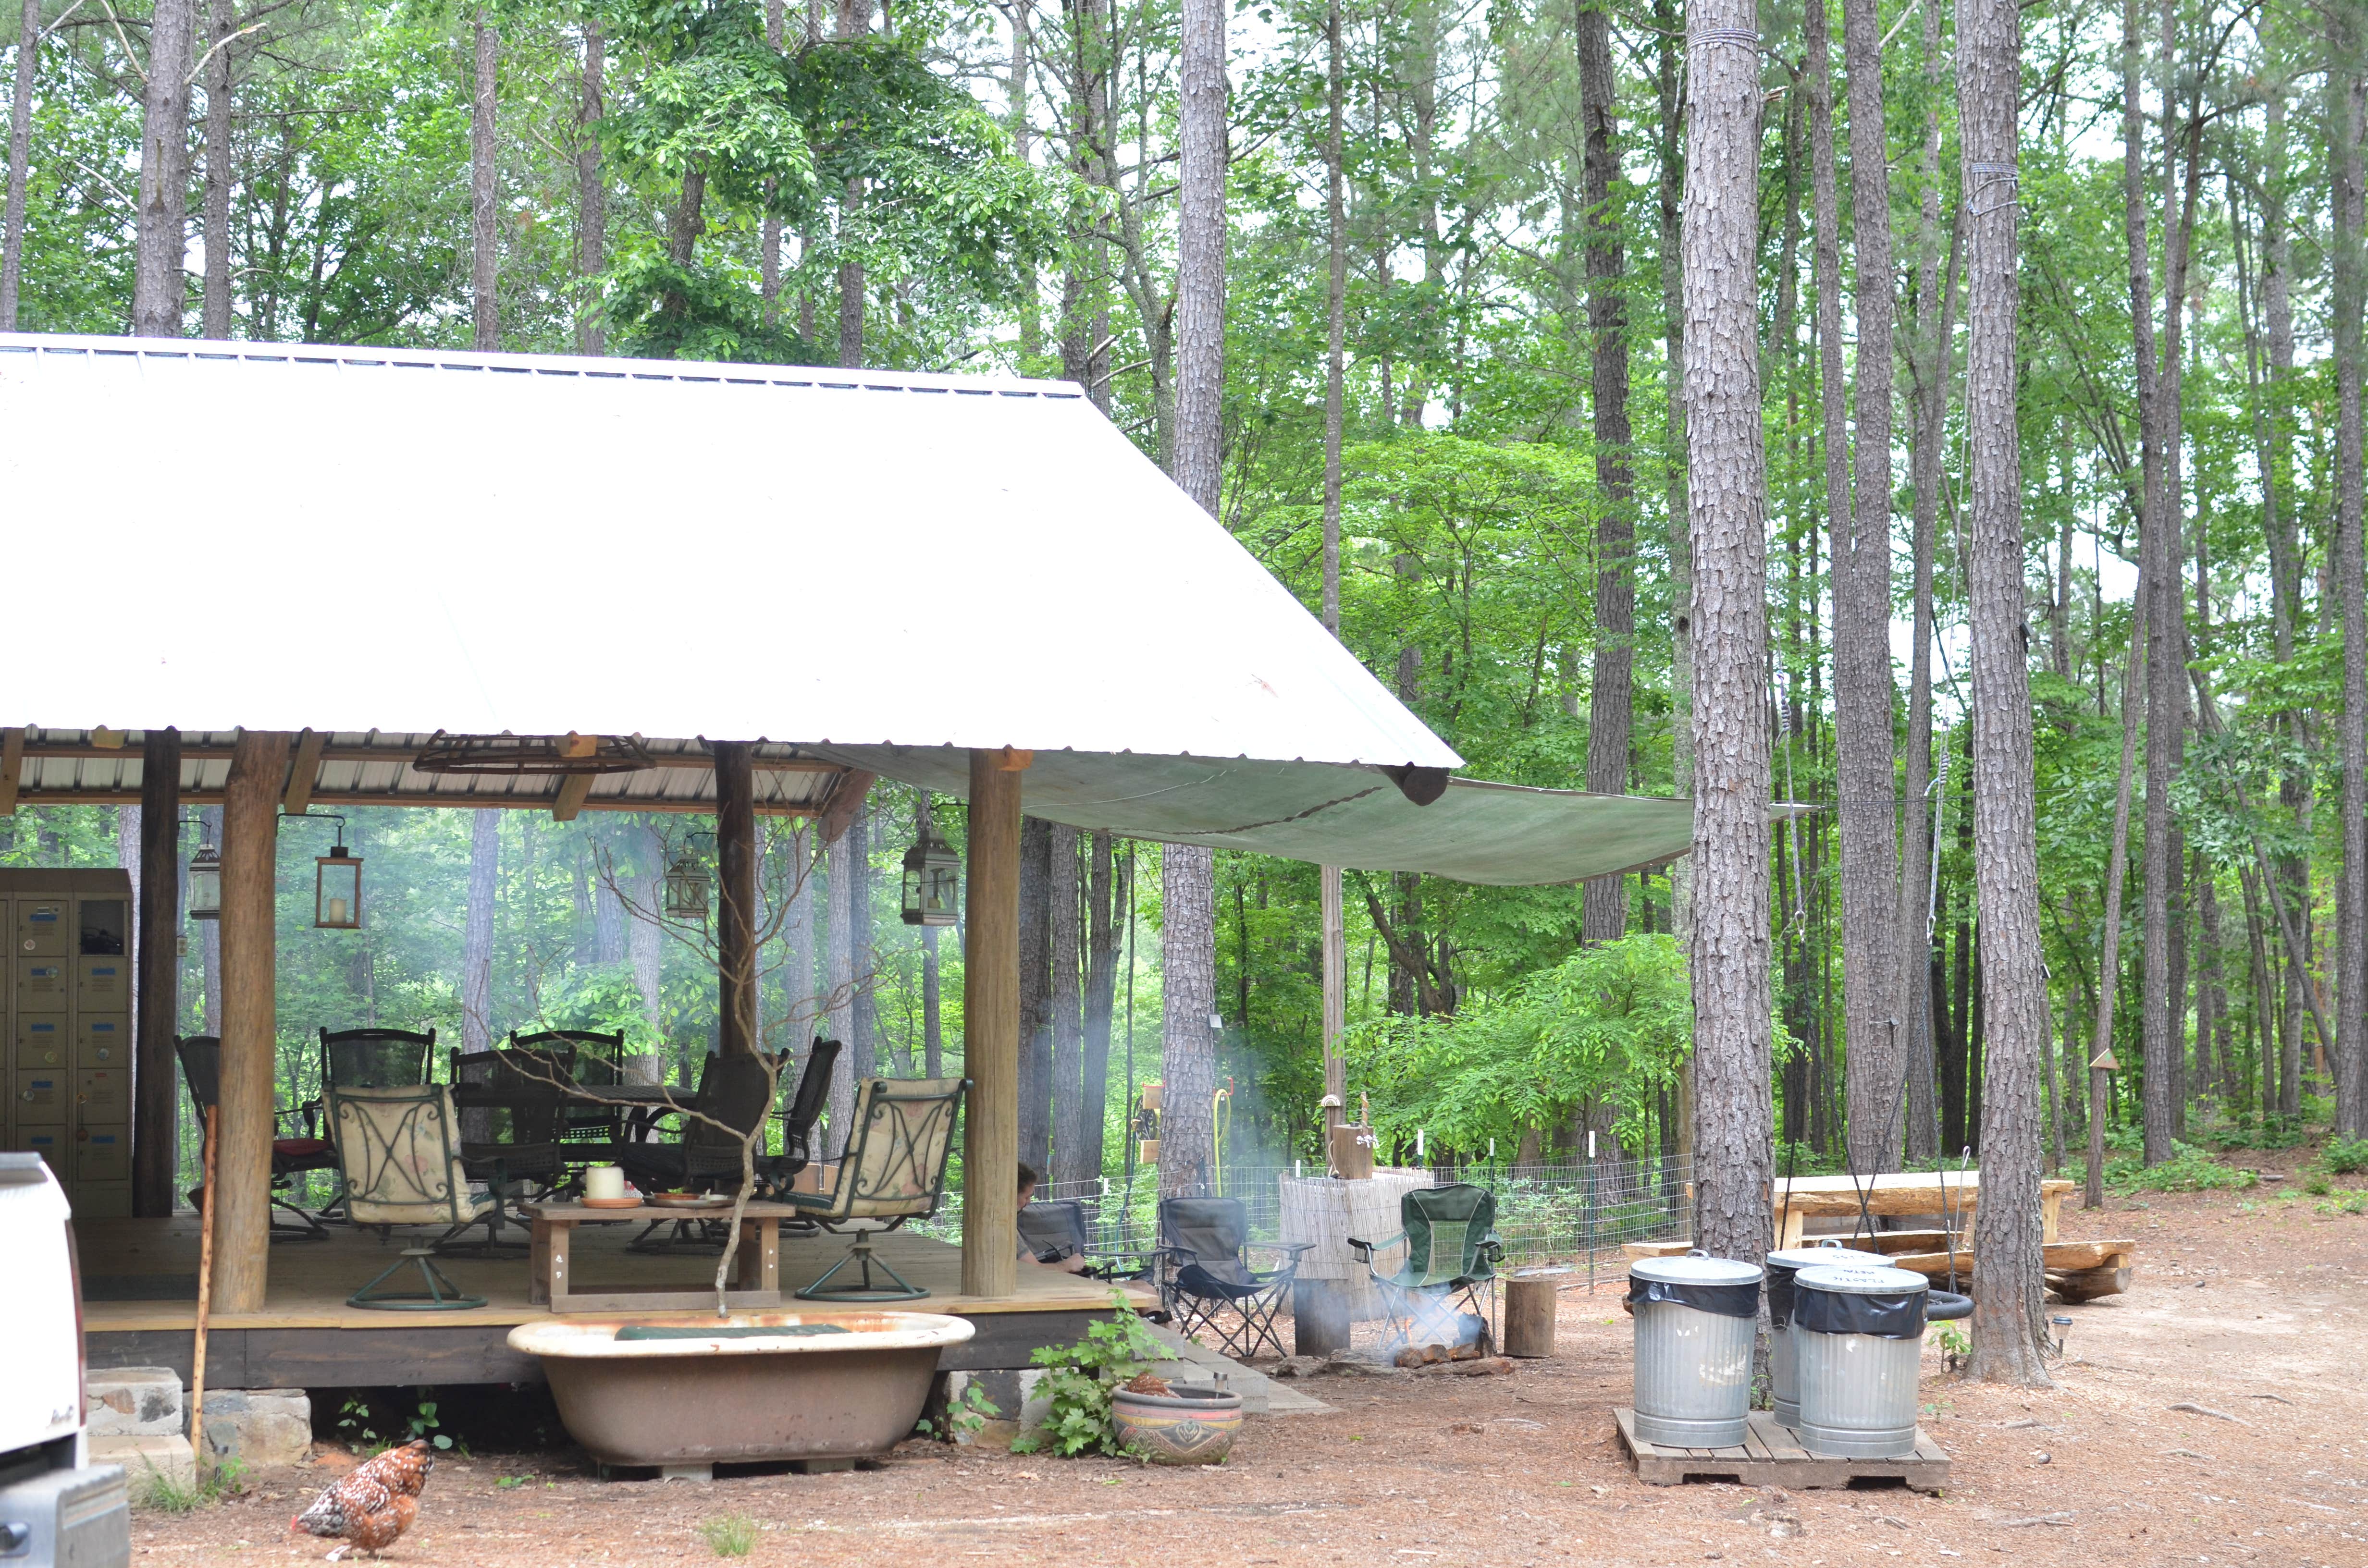 The outdoor kitchen and sitting area